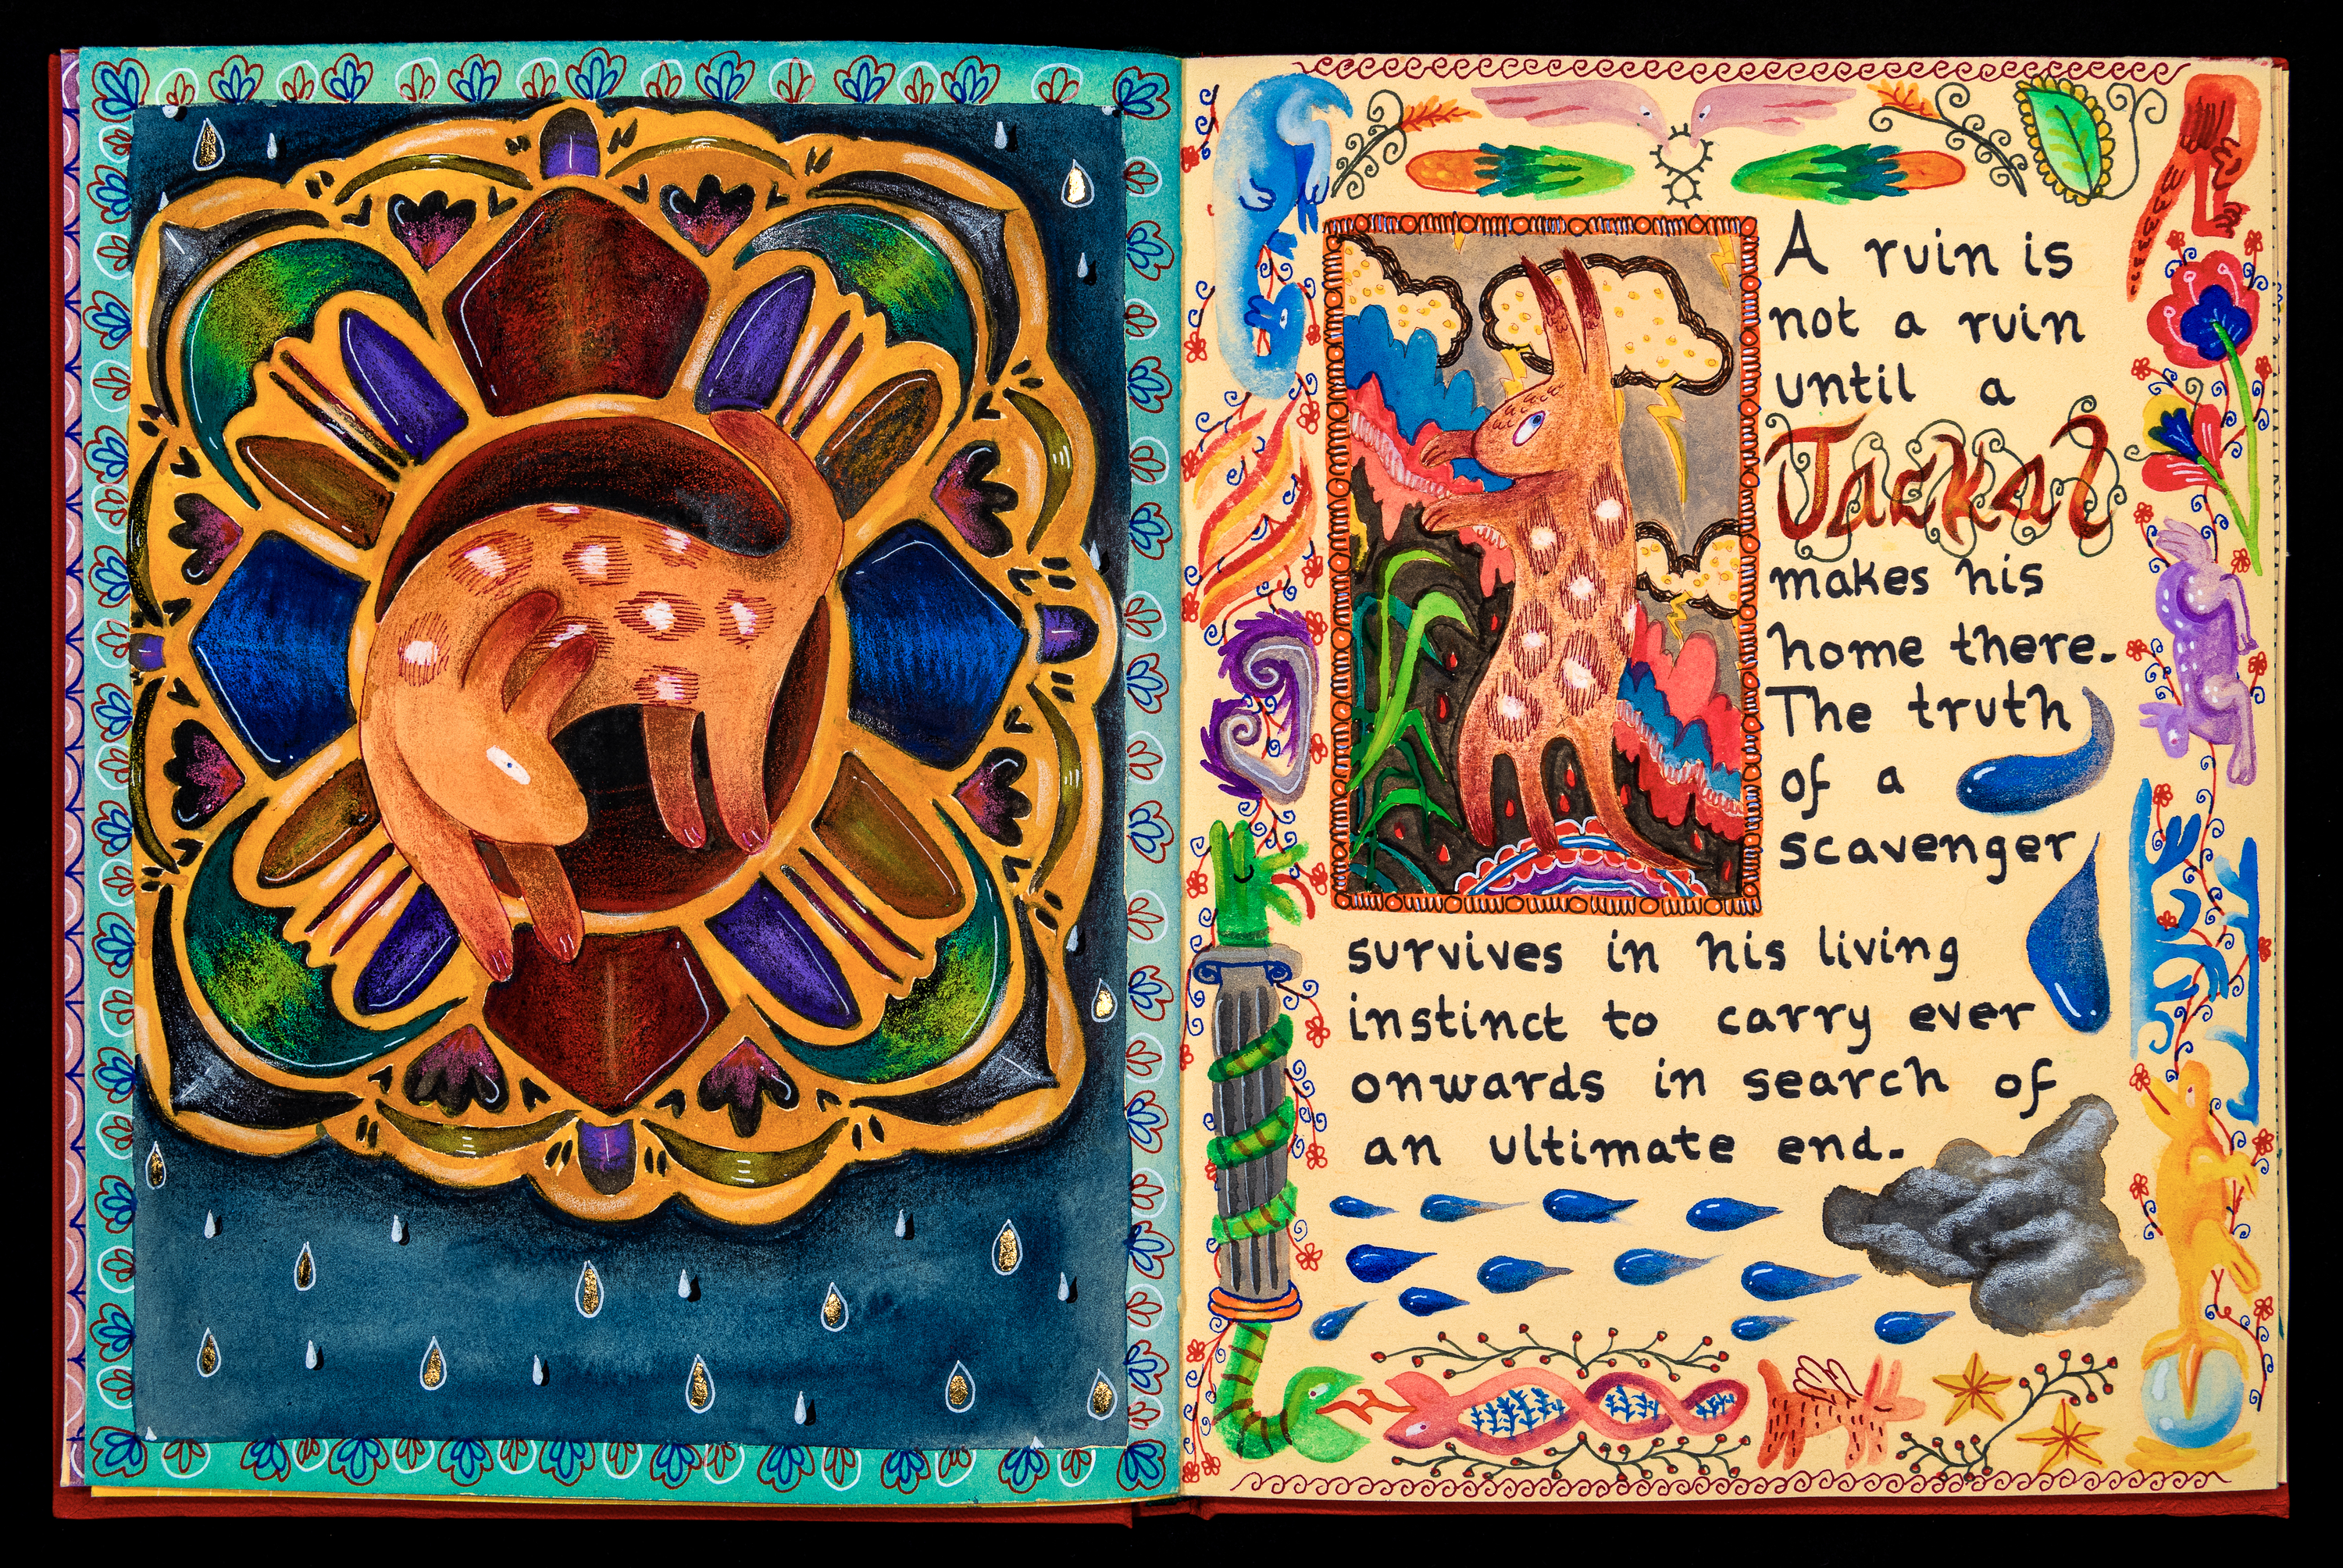  Spread from a book containing illustration and poetry in an illuminated manuscript style.